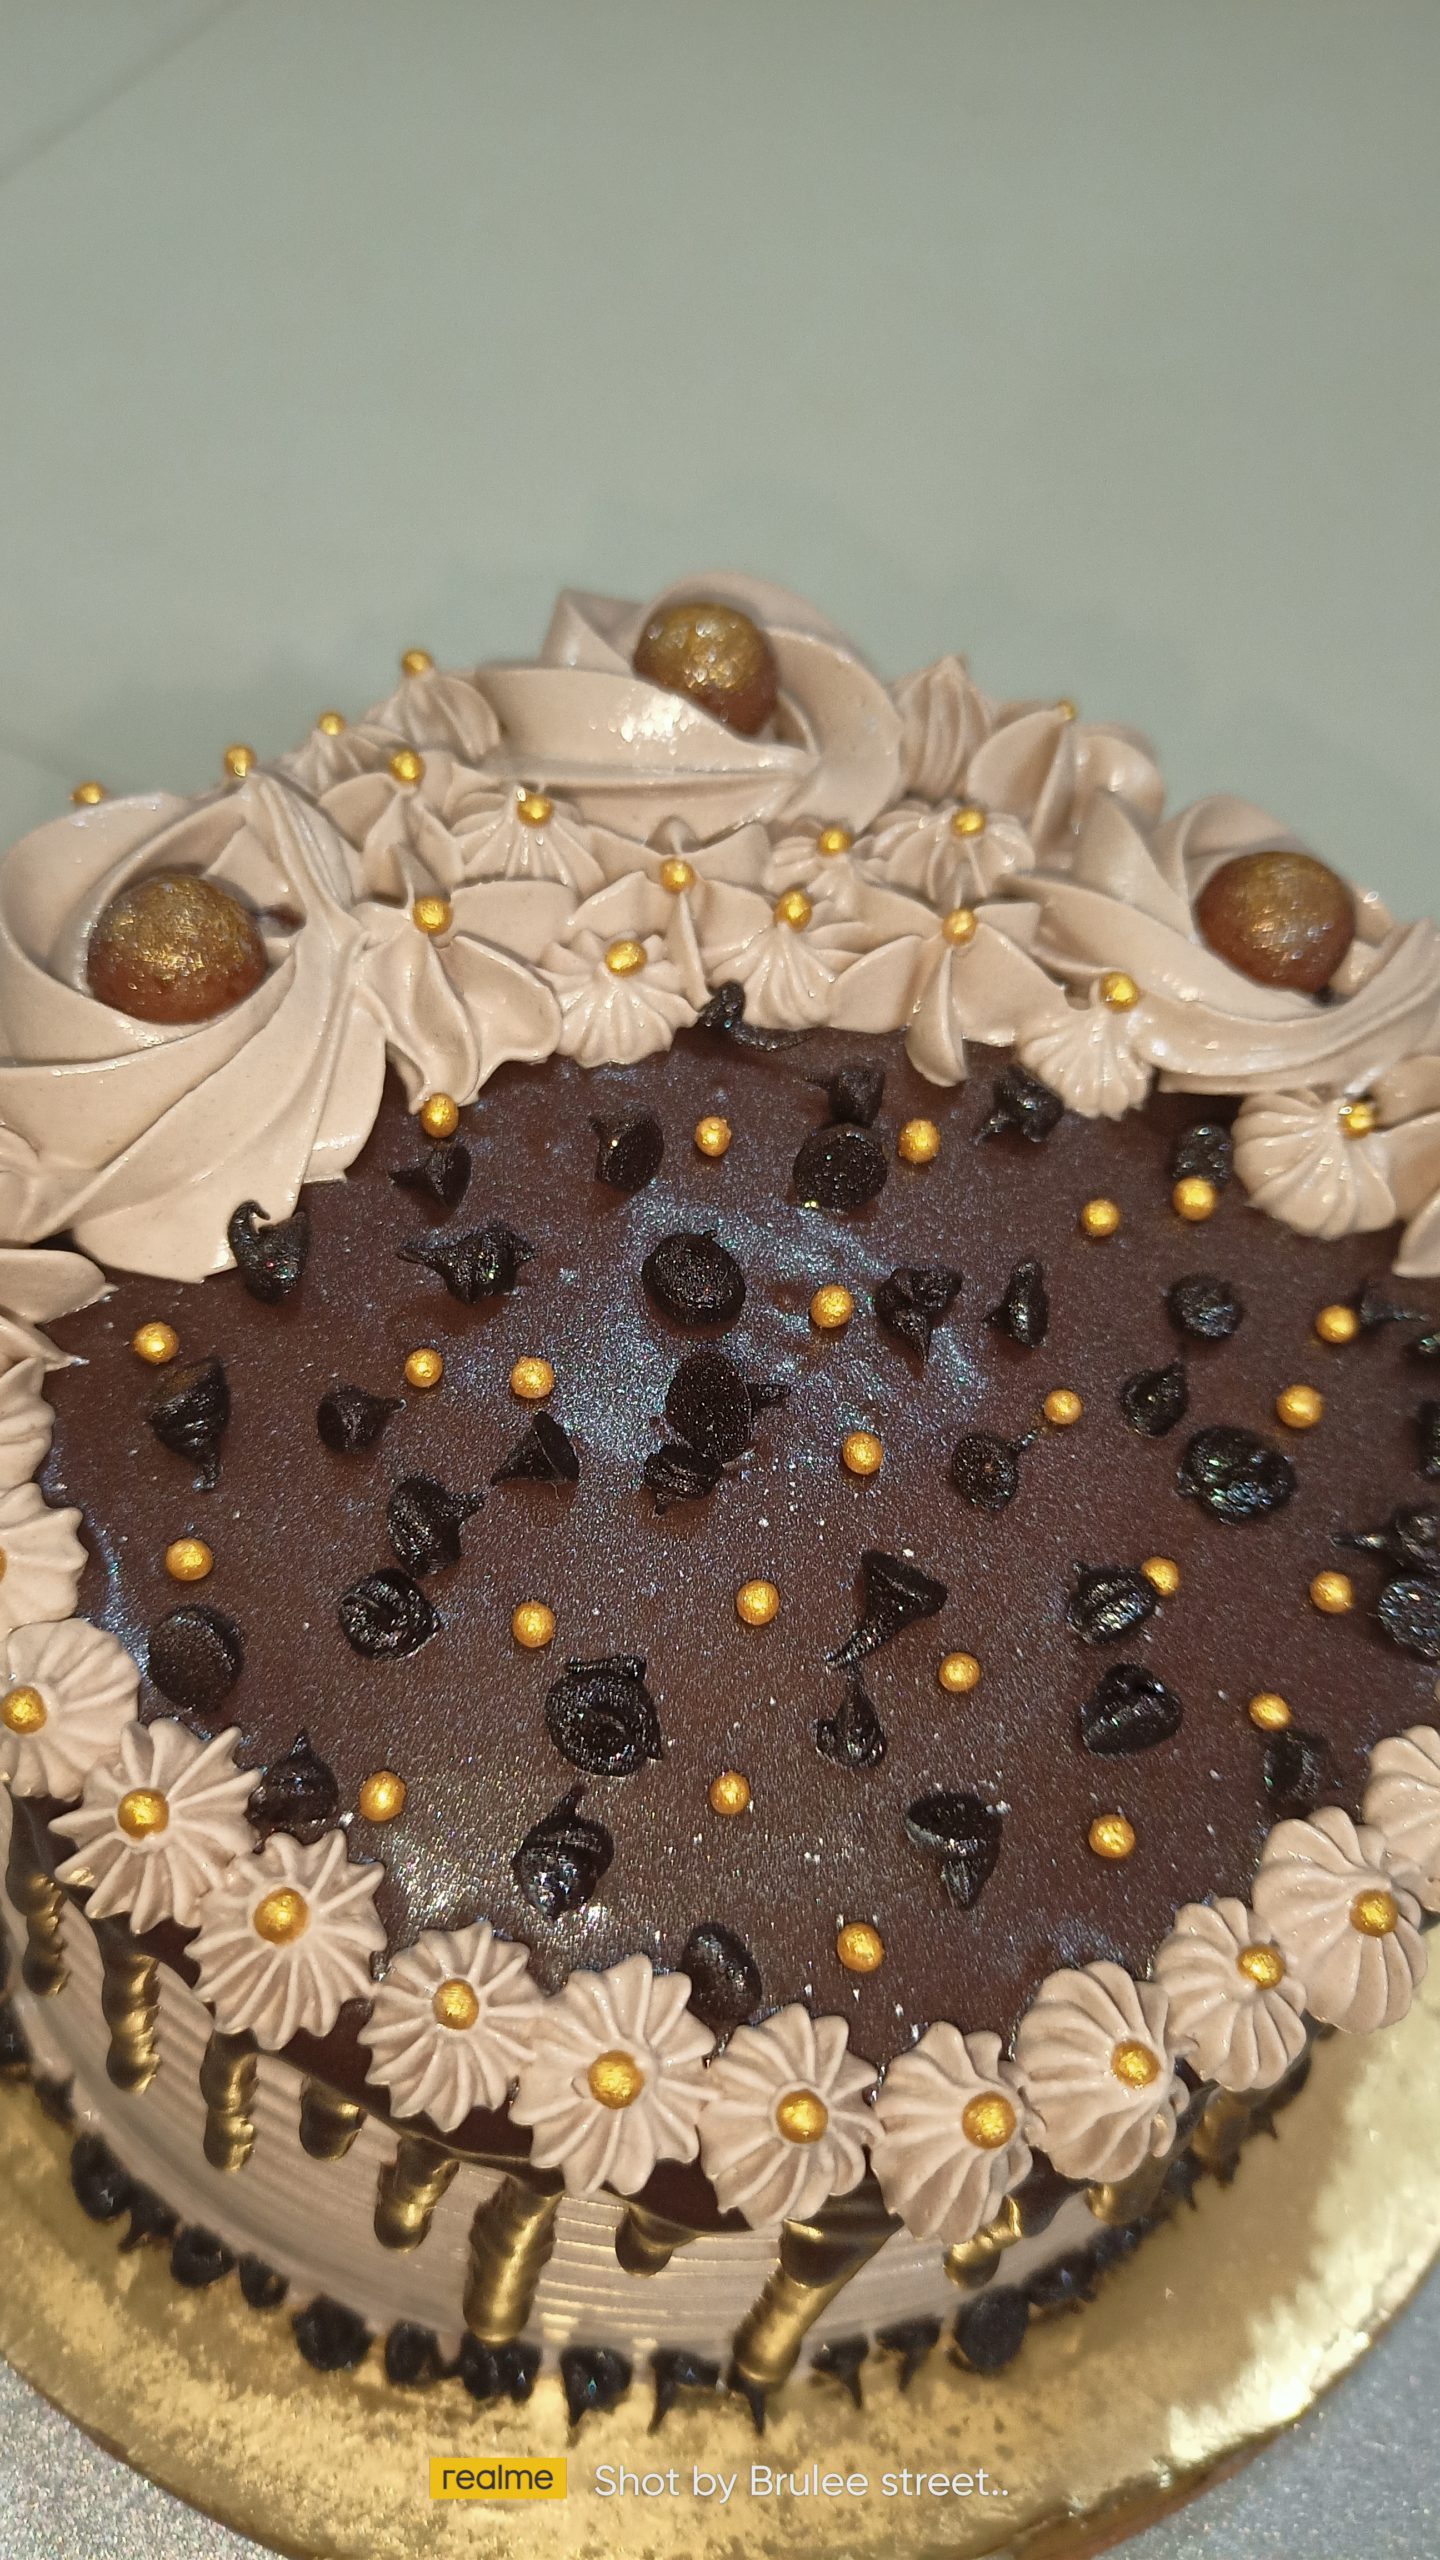 Chocochip-Mousse Cake Designs, Images, Price Near Me